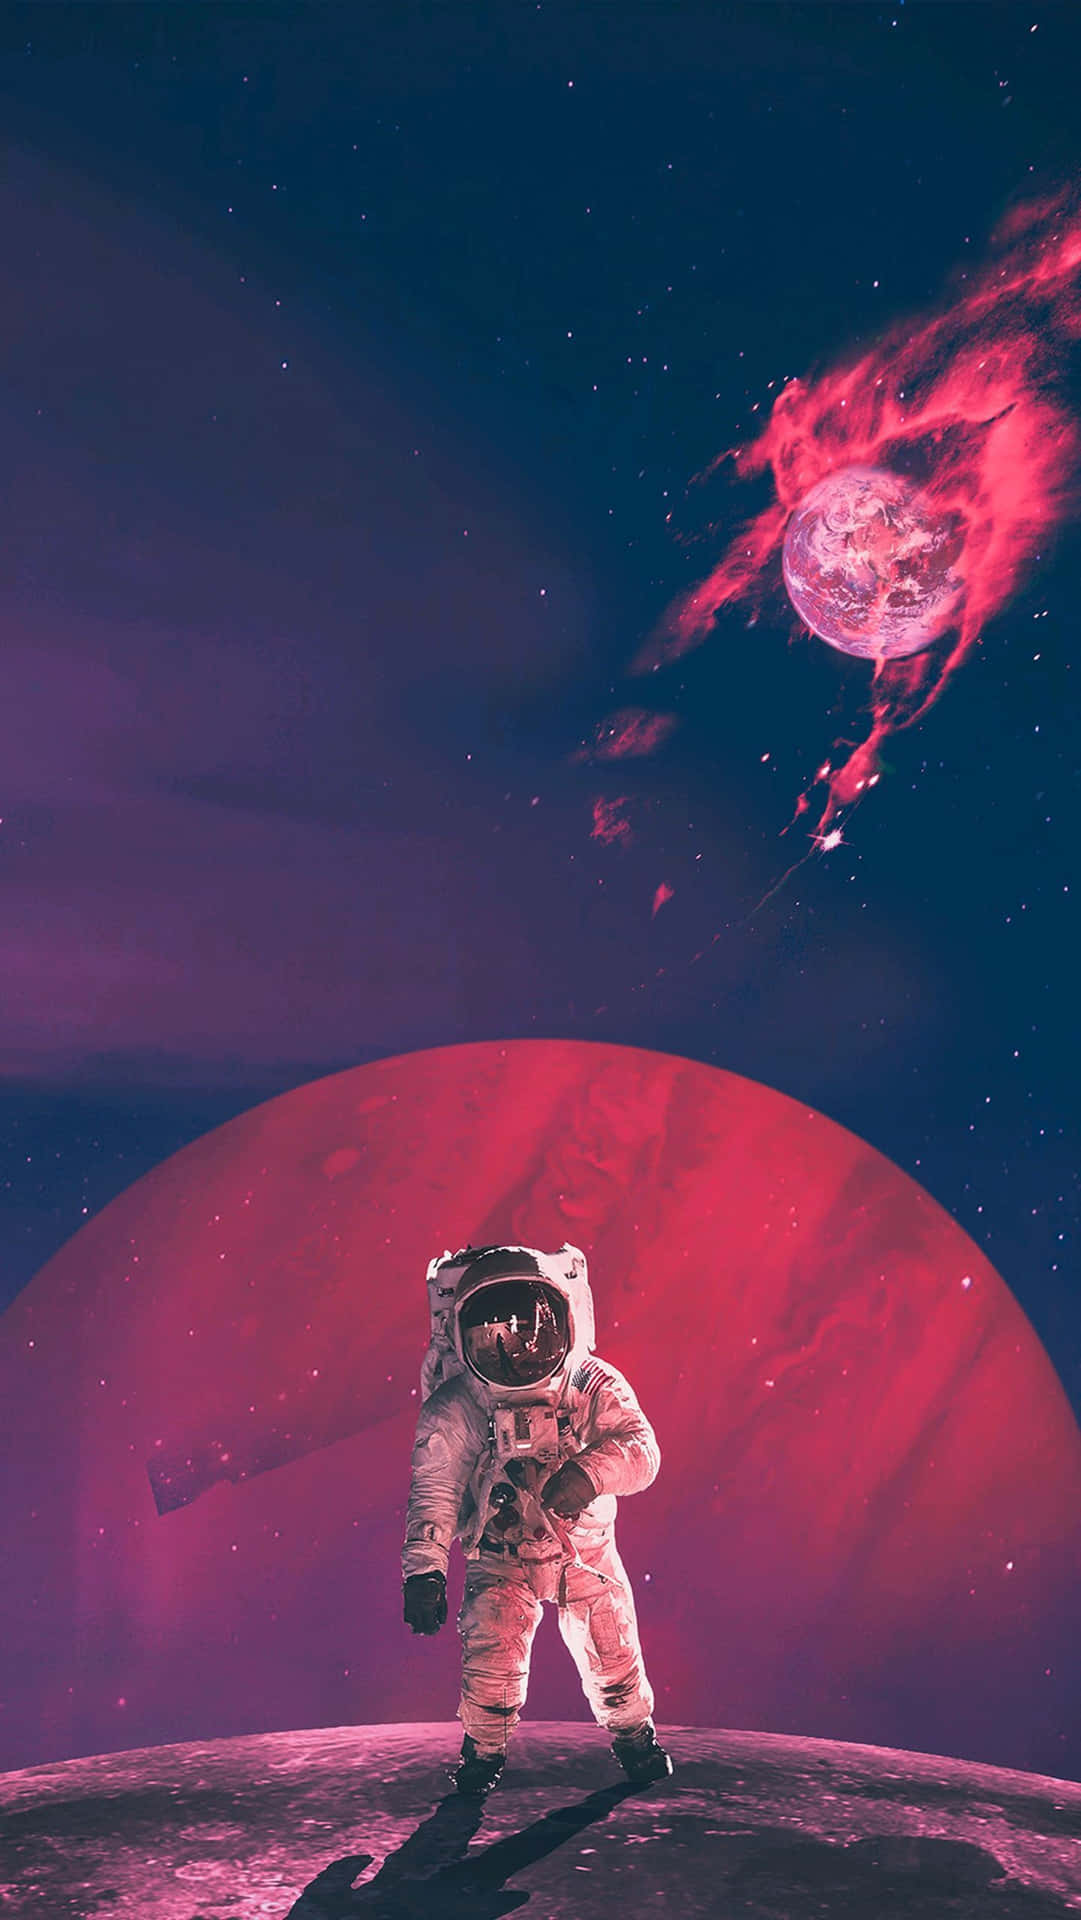 A futuristic astronaut discovering new phone opportunities. Wallpaper